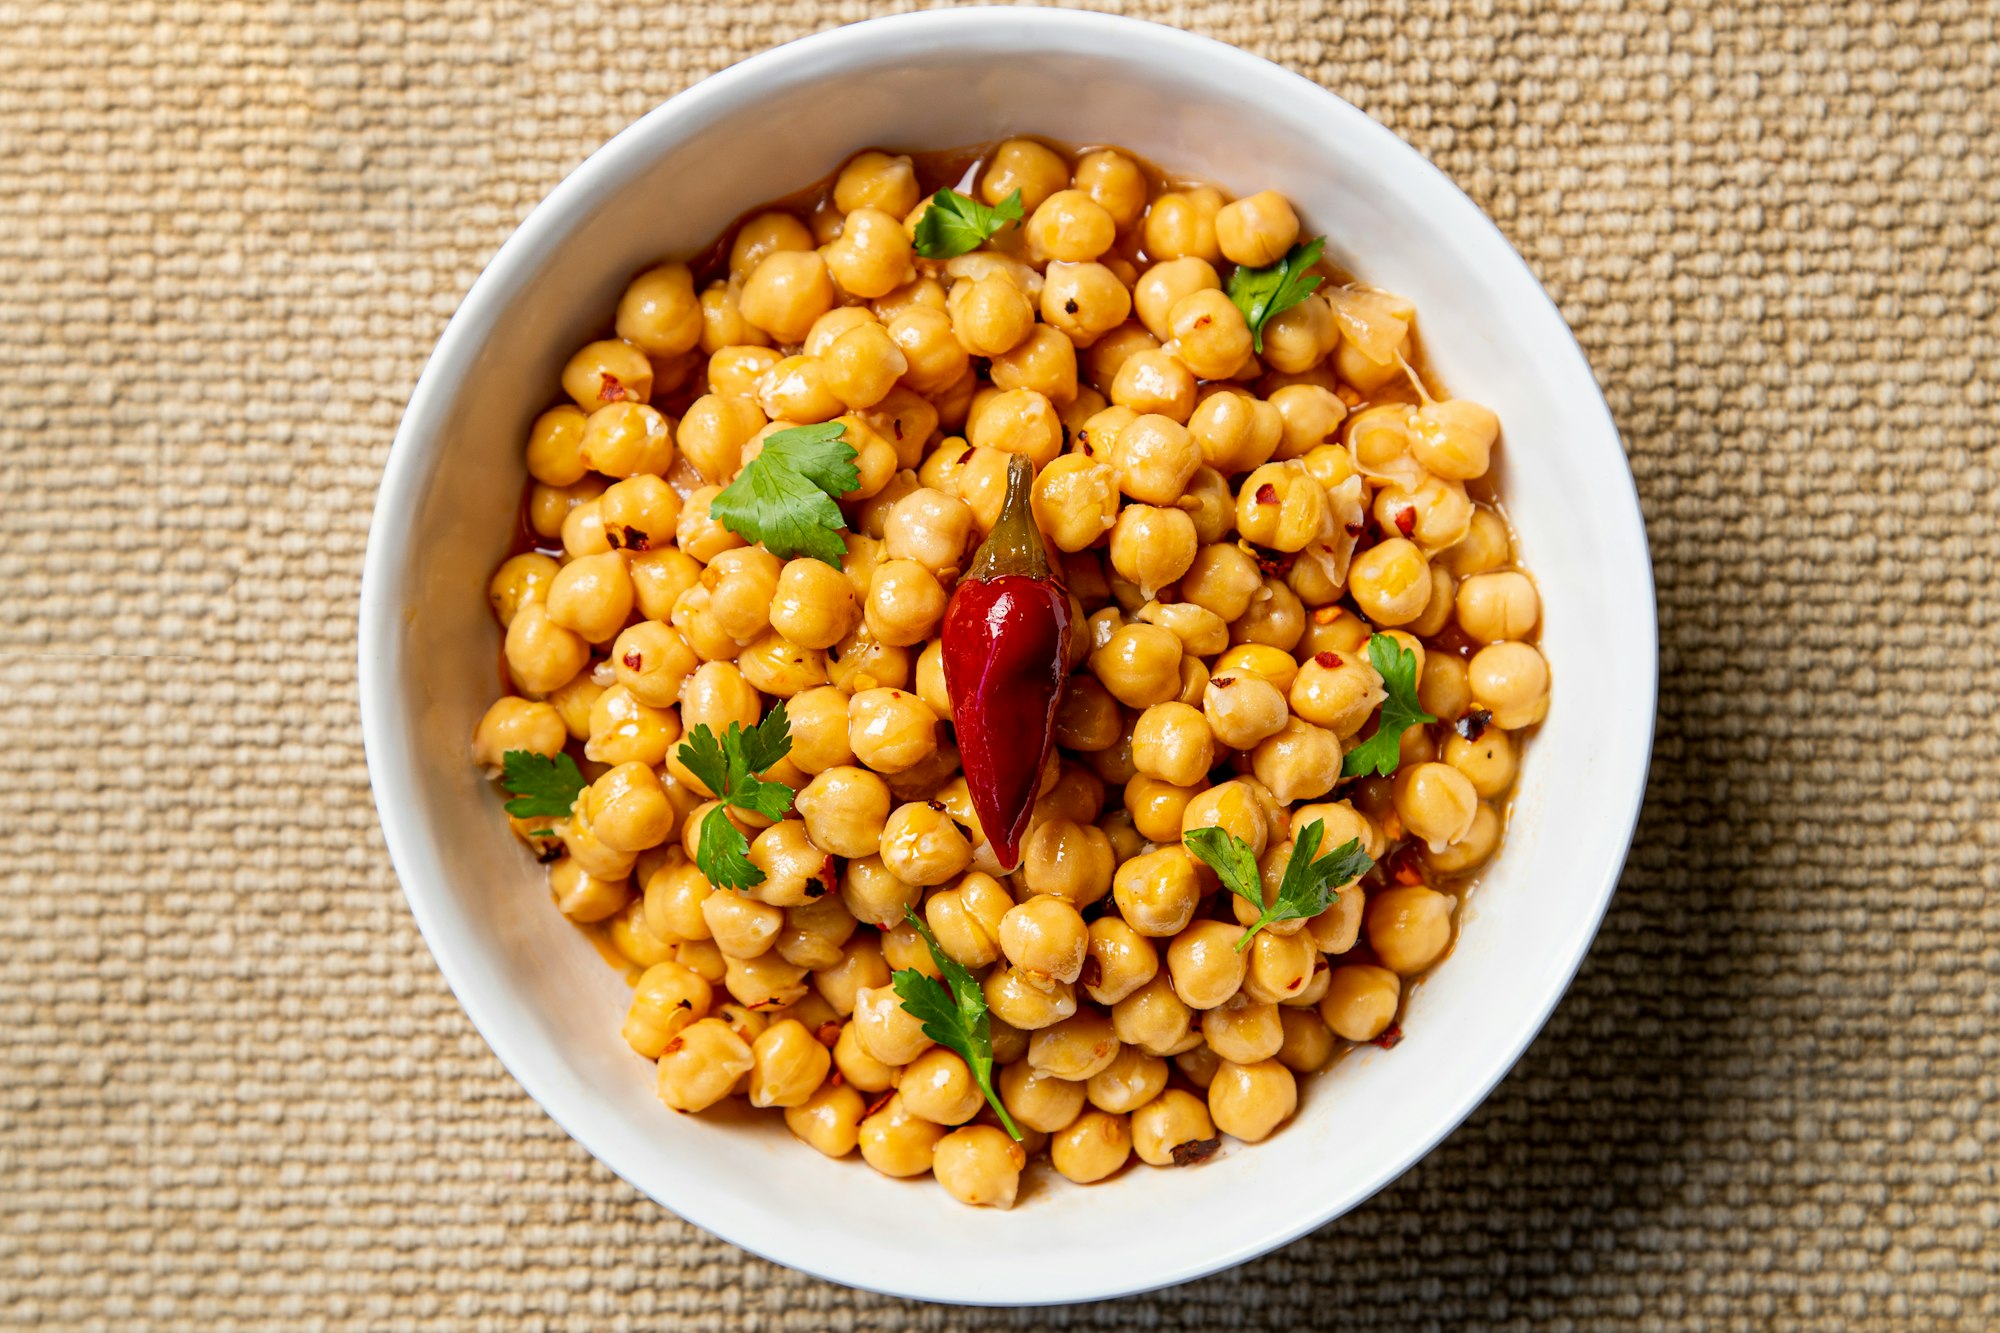 Spicy Chicpea side dish